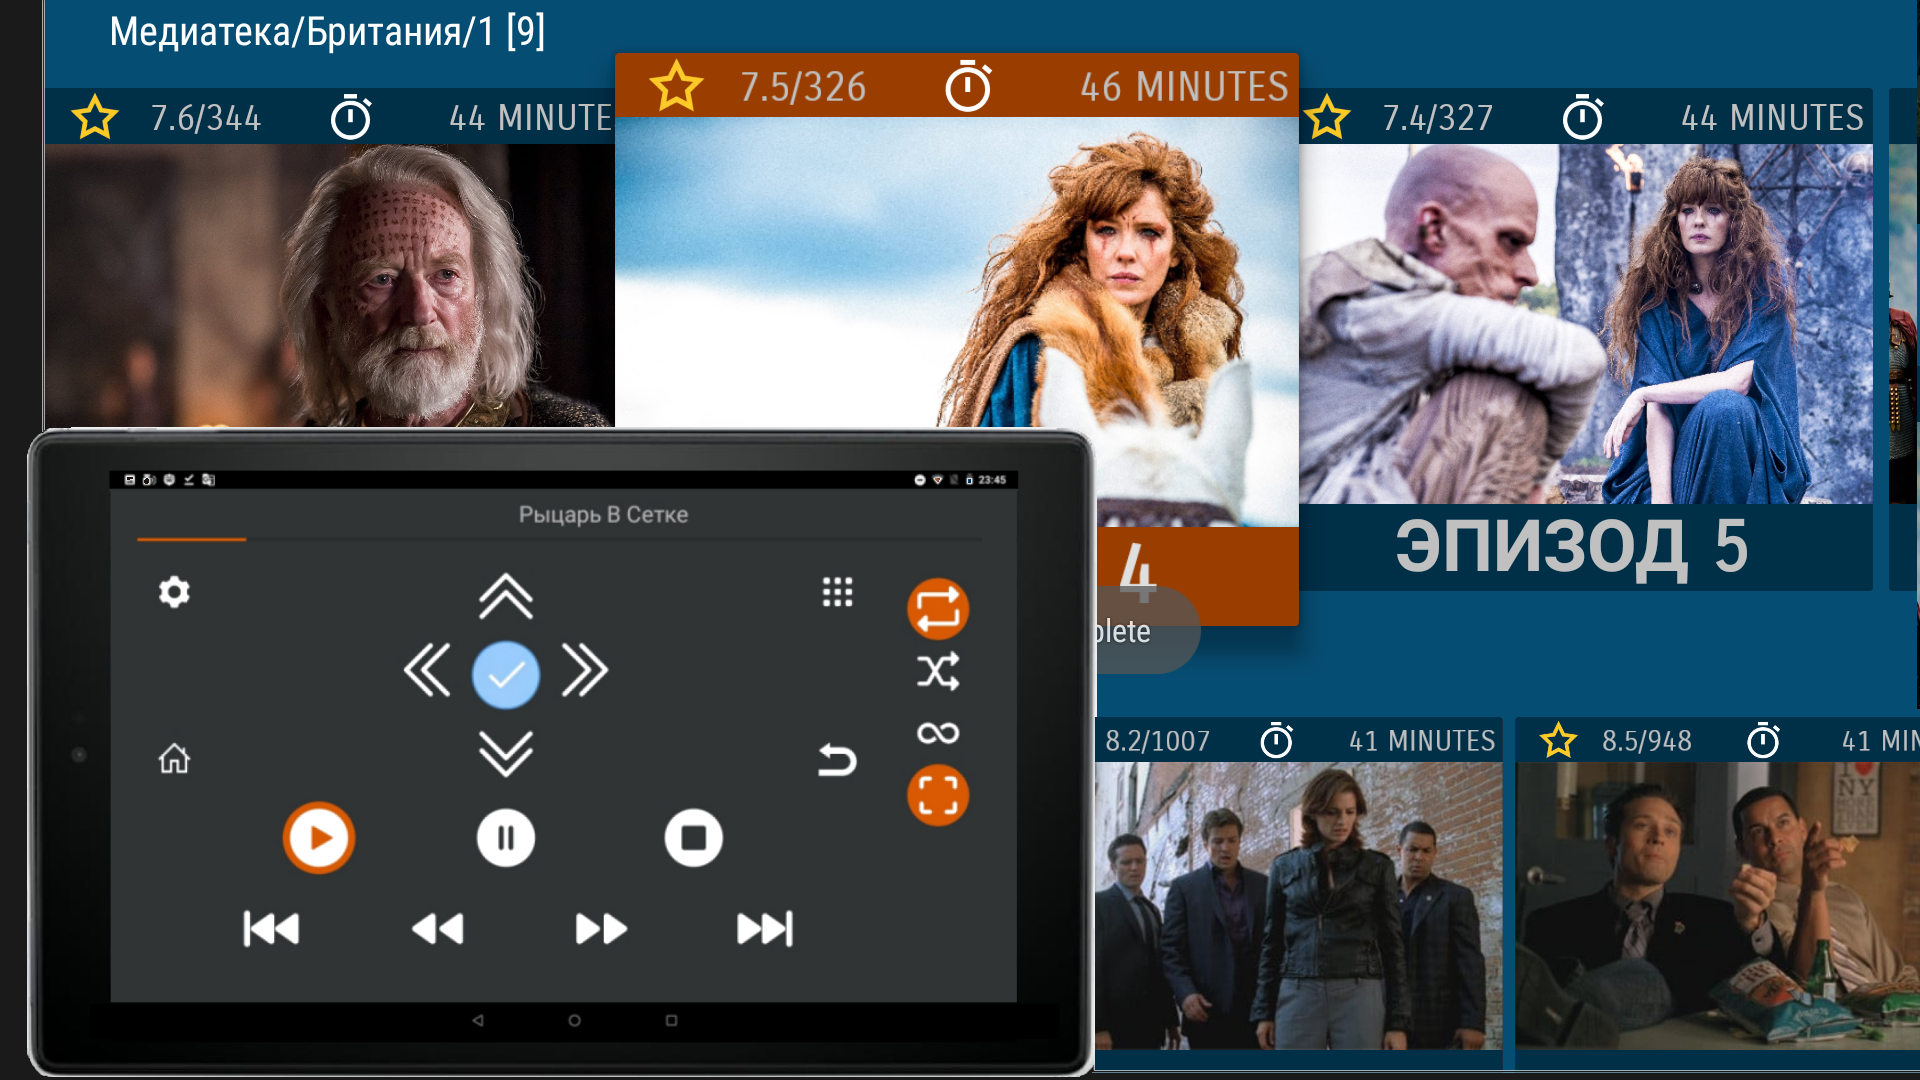 VLC Android-TV remote - phone/tablet remote